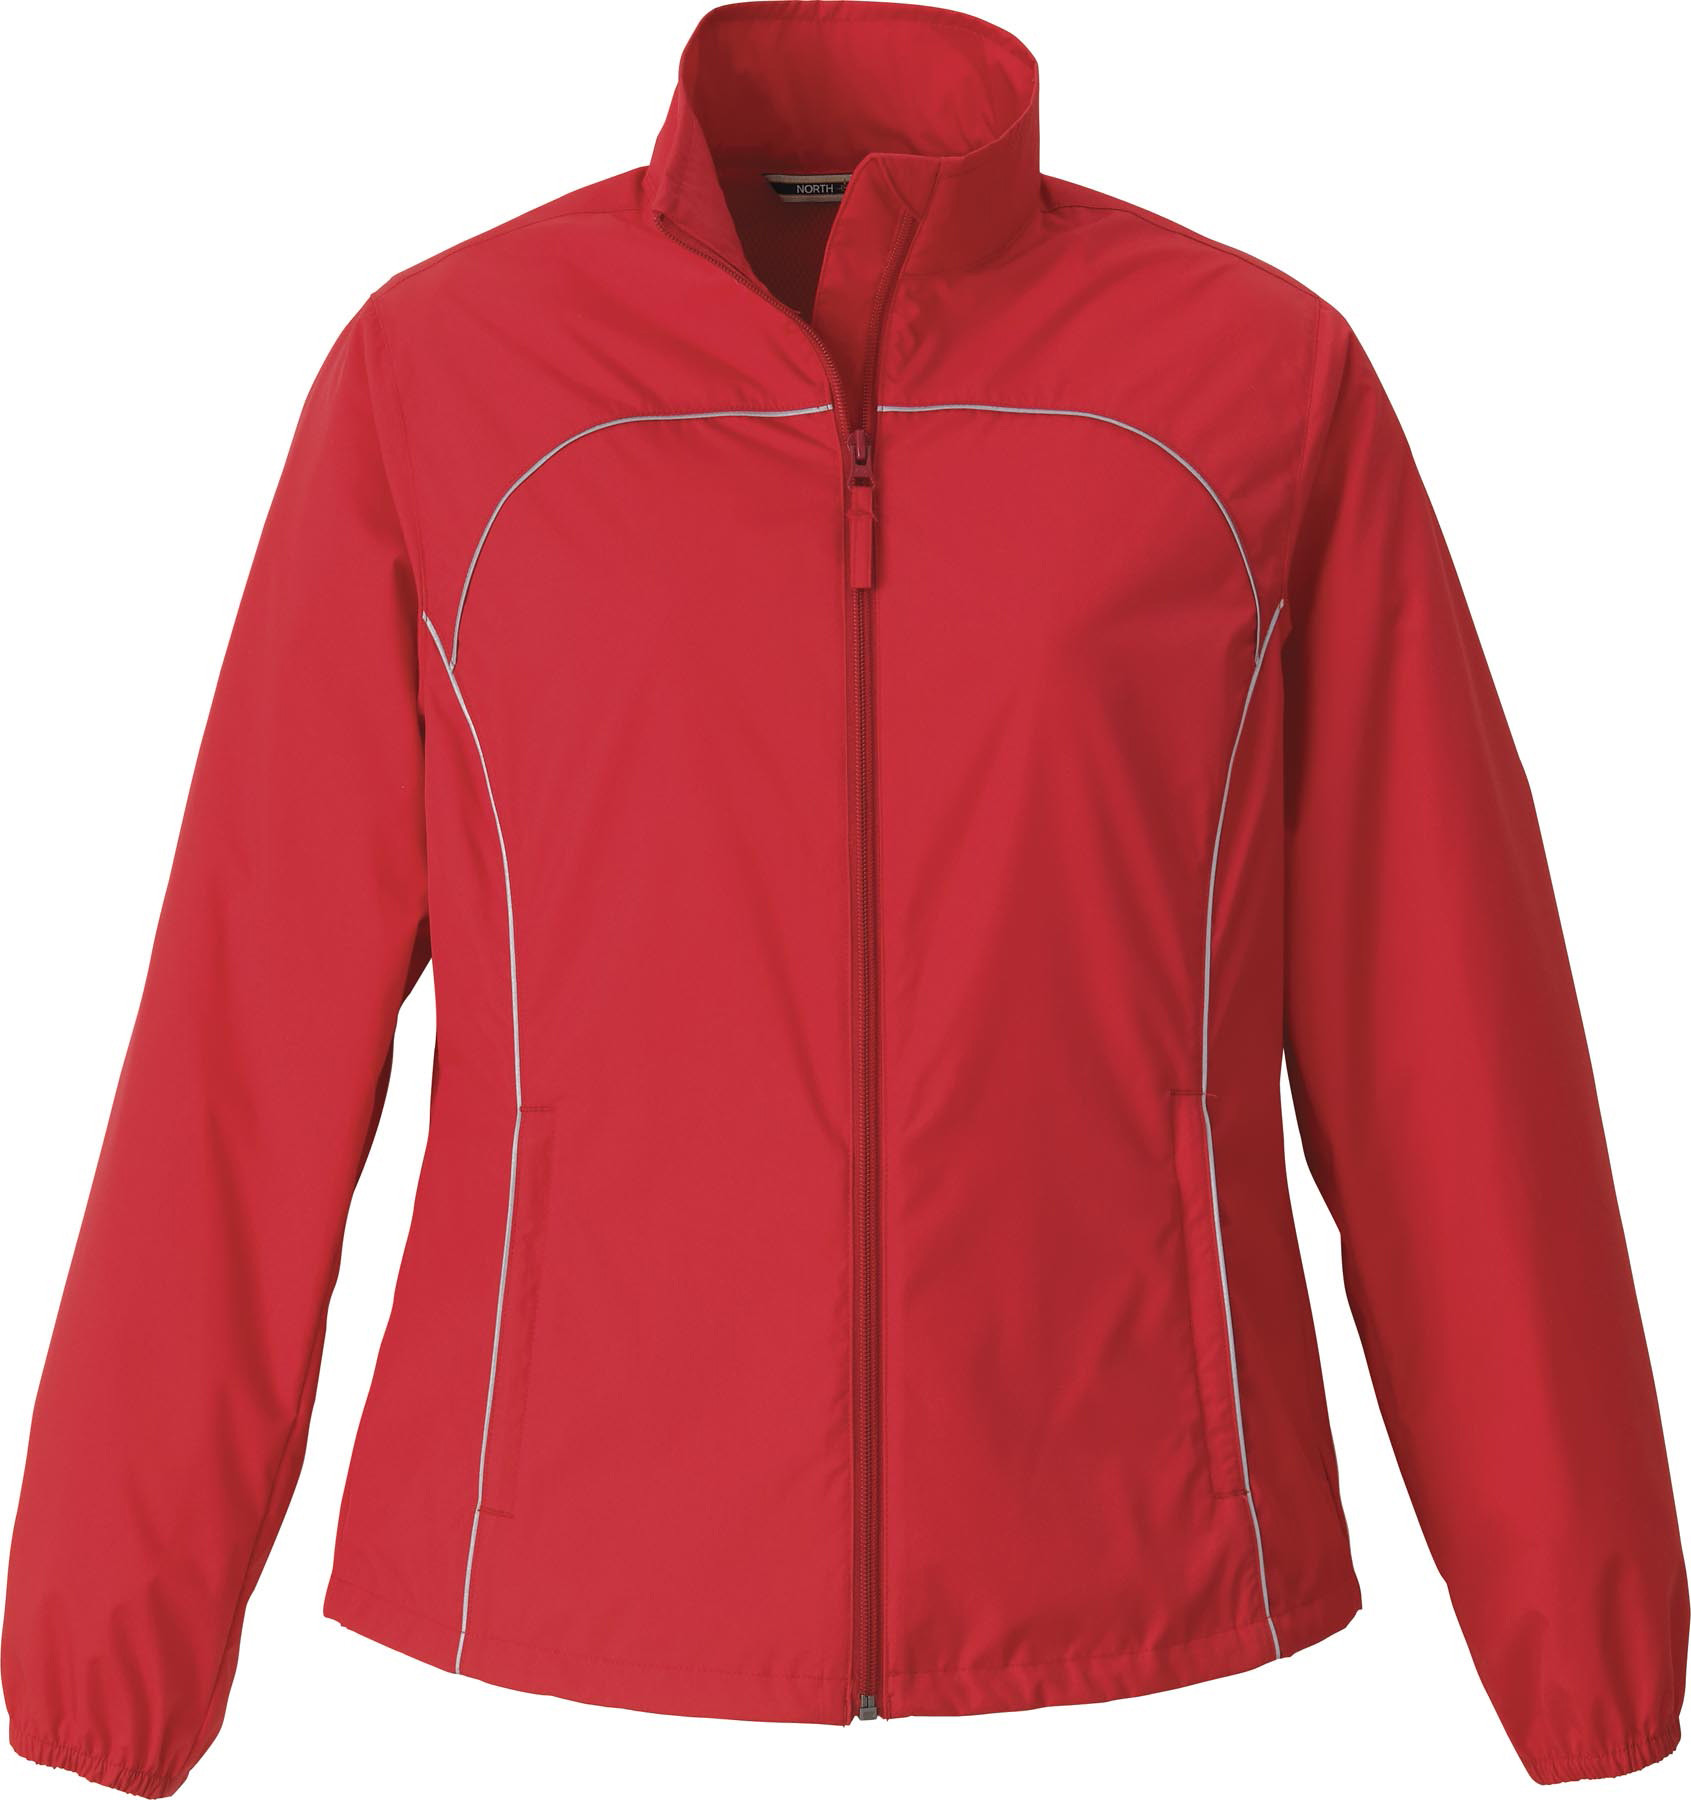 Ash City e.c.o Outerwear 78058 - Ladies' Lightweight Recycled Polyester Jacket